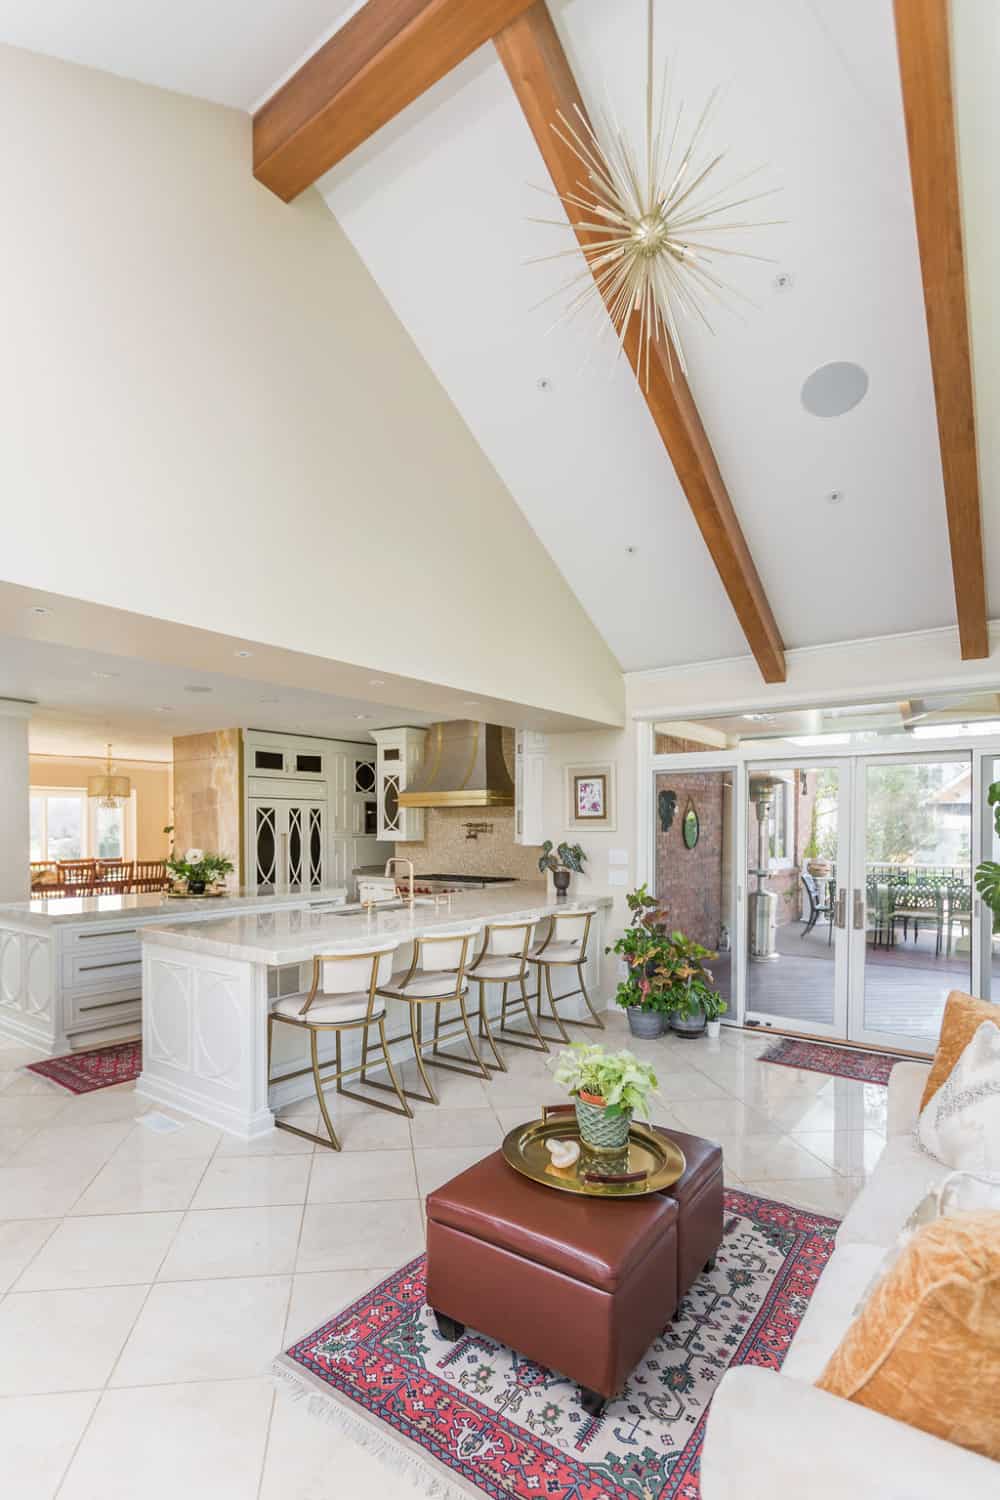 Nicholas Design Build | A large open kitchen and living room with vaulted ceilings undergoing a remodel.